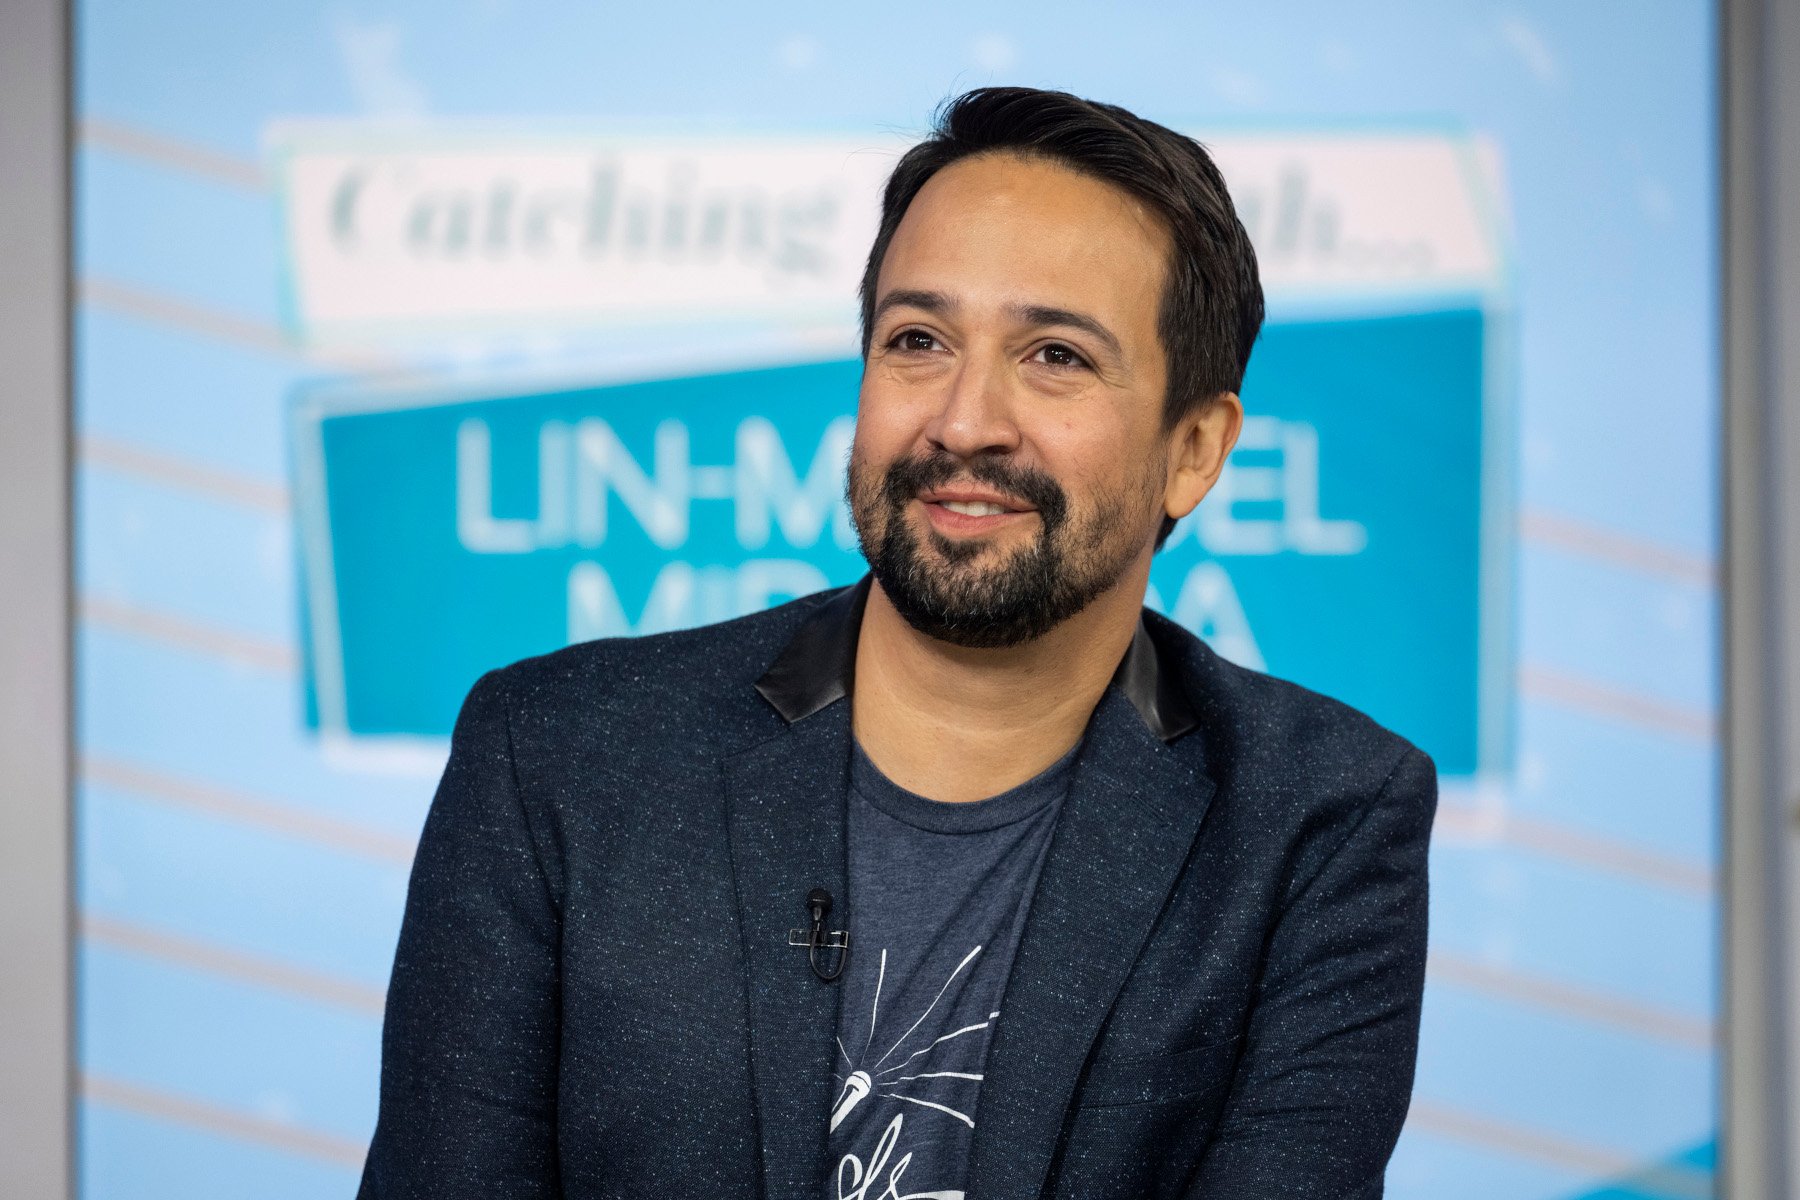 Lin-Manuel Miranda for our article about the 'Percy Jackson and the Olympians' cast. He's wearing a dark blue T-shirt, blue blazer, and smiling.